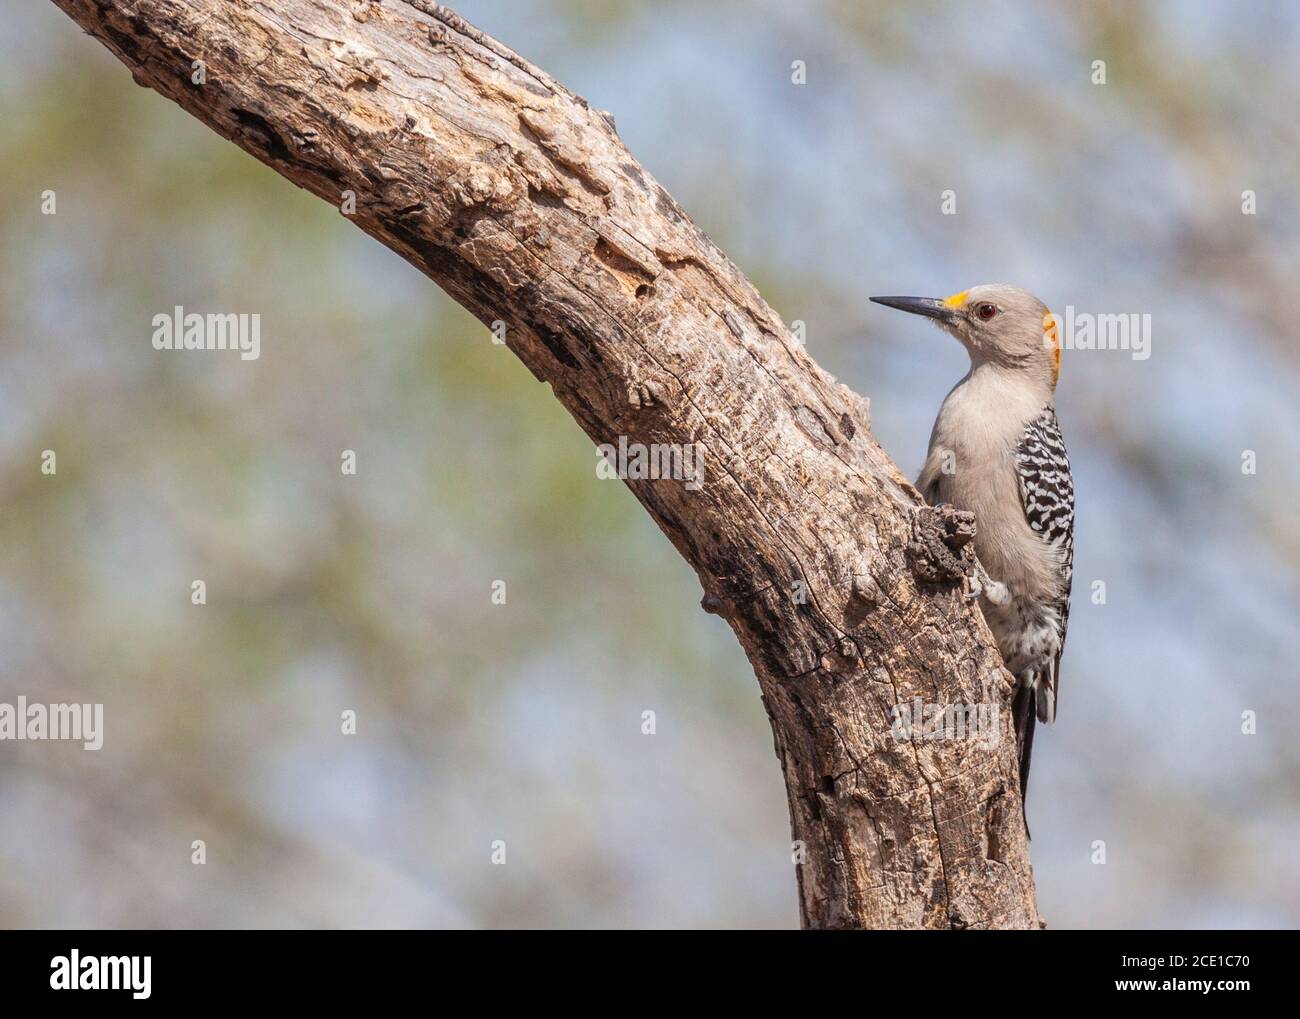 Female Golden-fronted Woodpecker, Melanerpes aurifrons, at the Javelina-Martin ranch and refuge near McAllen, Texas, in the Rio Grande Valley. Stock Photo